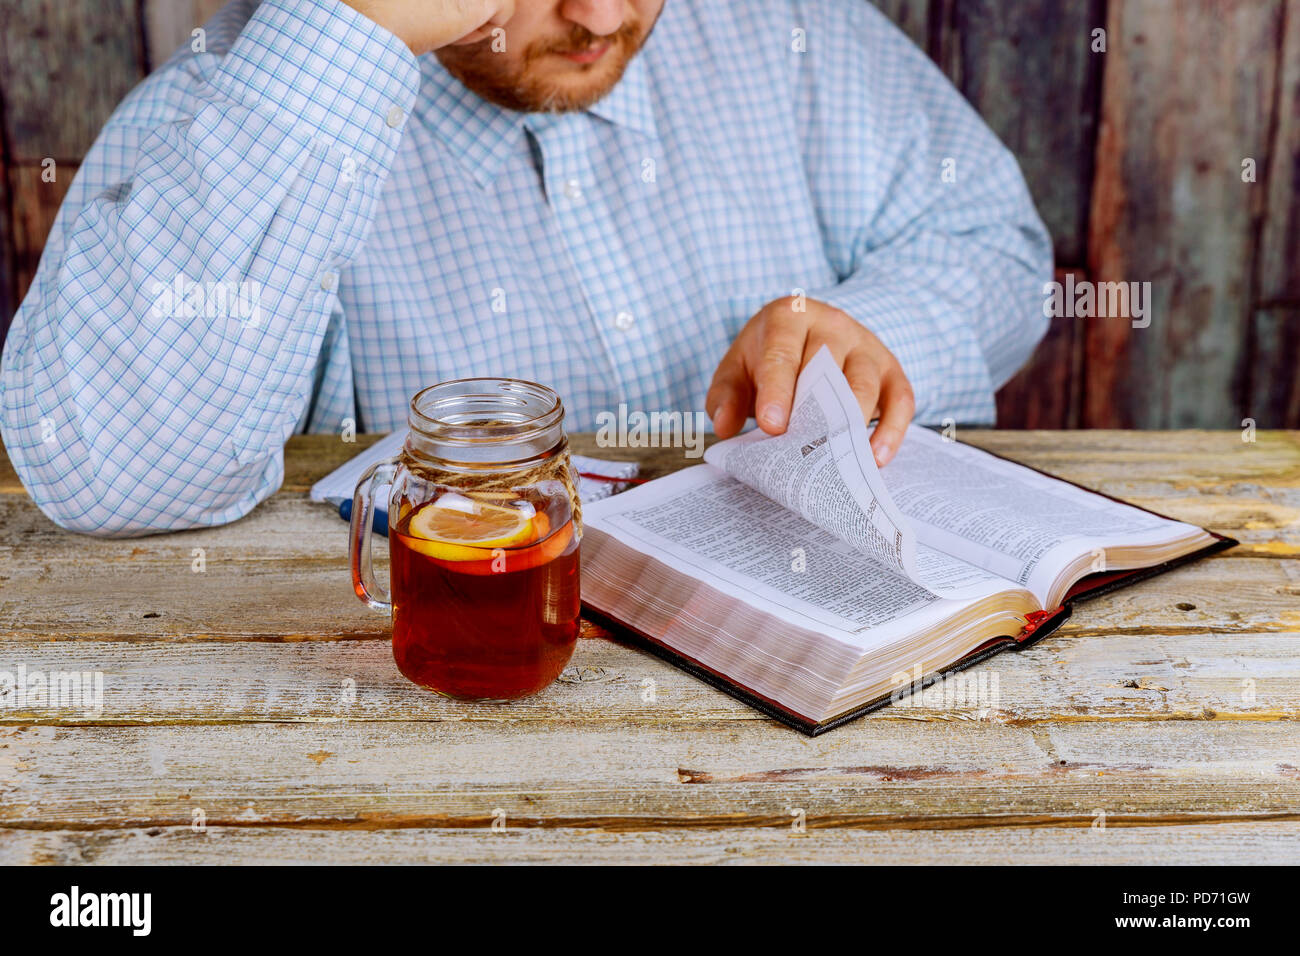 A middle aged man sitting at a table reading the Bible Stock Photo